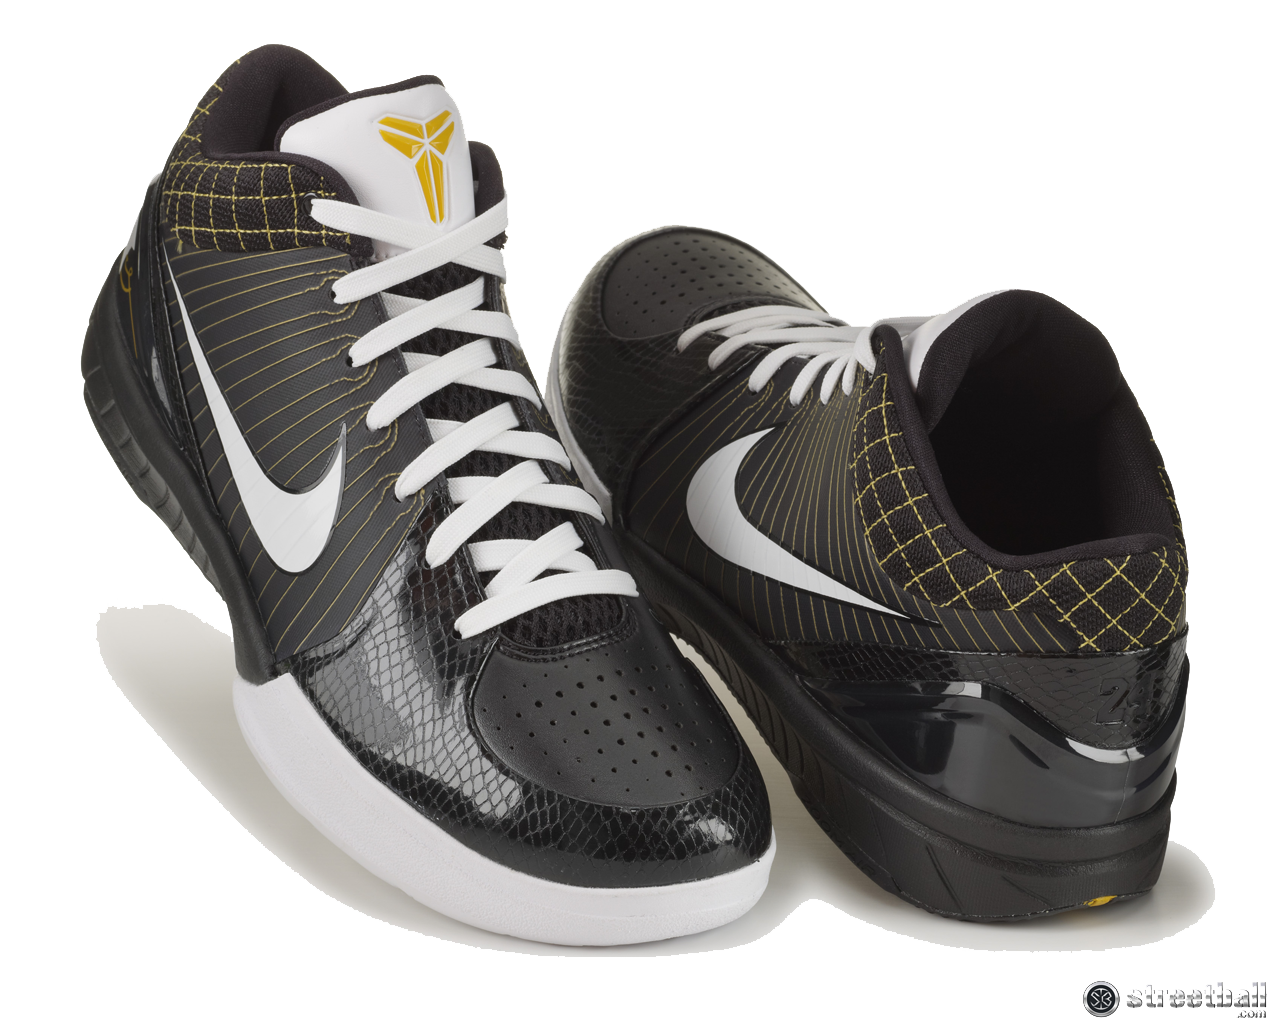 Nike Shoes Png Image - Shoes, Transparent background PNG HD thumbnail